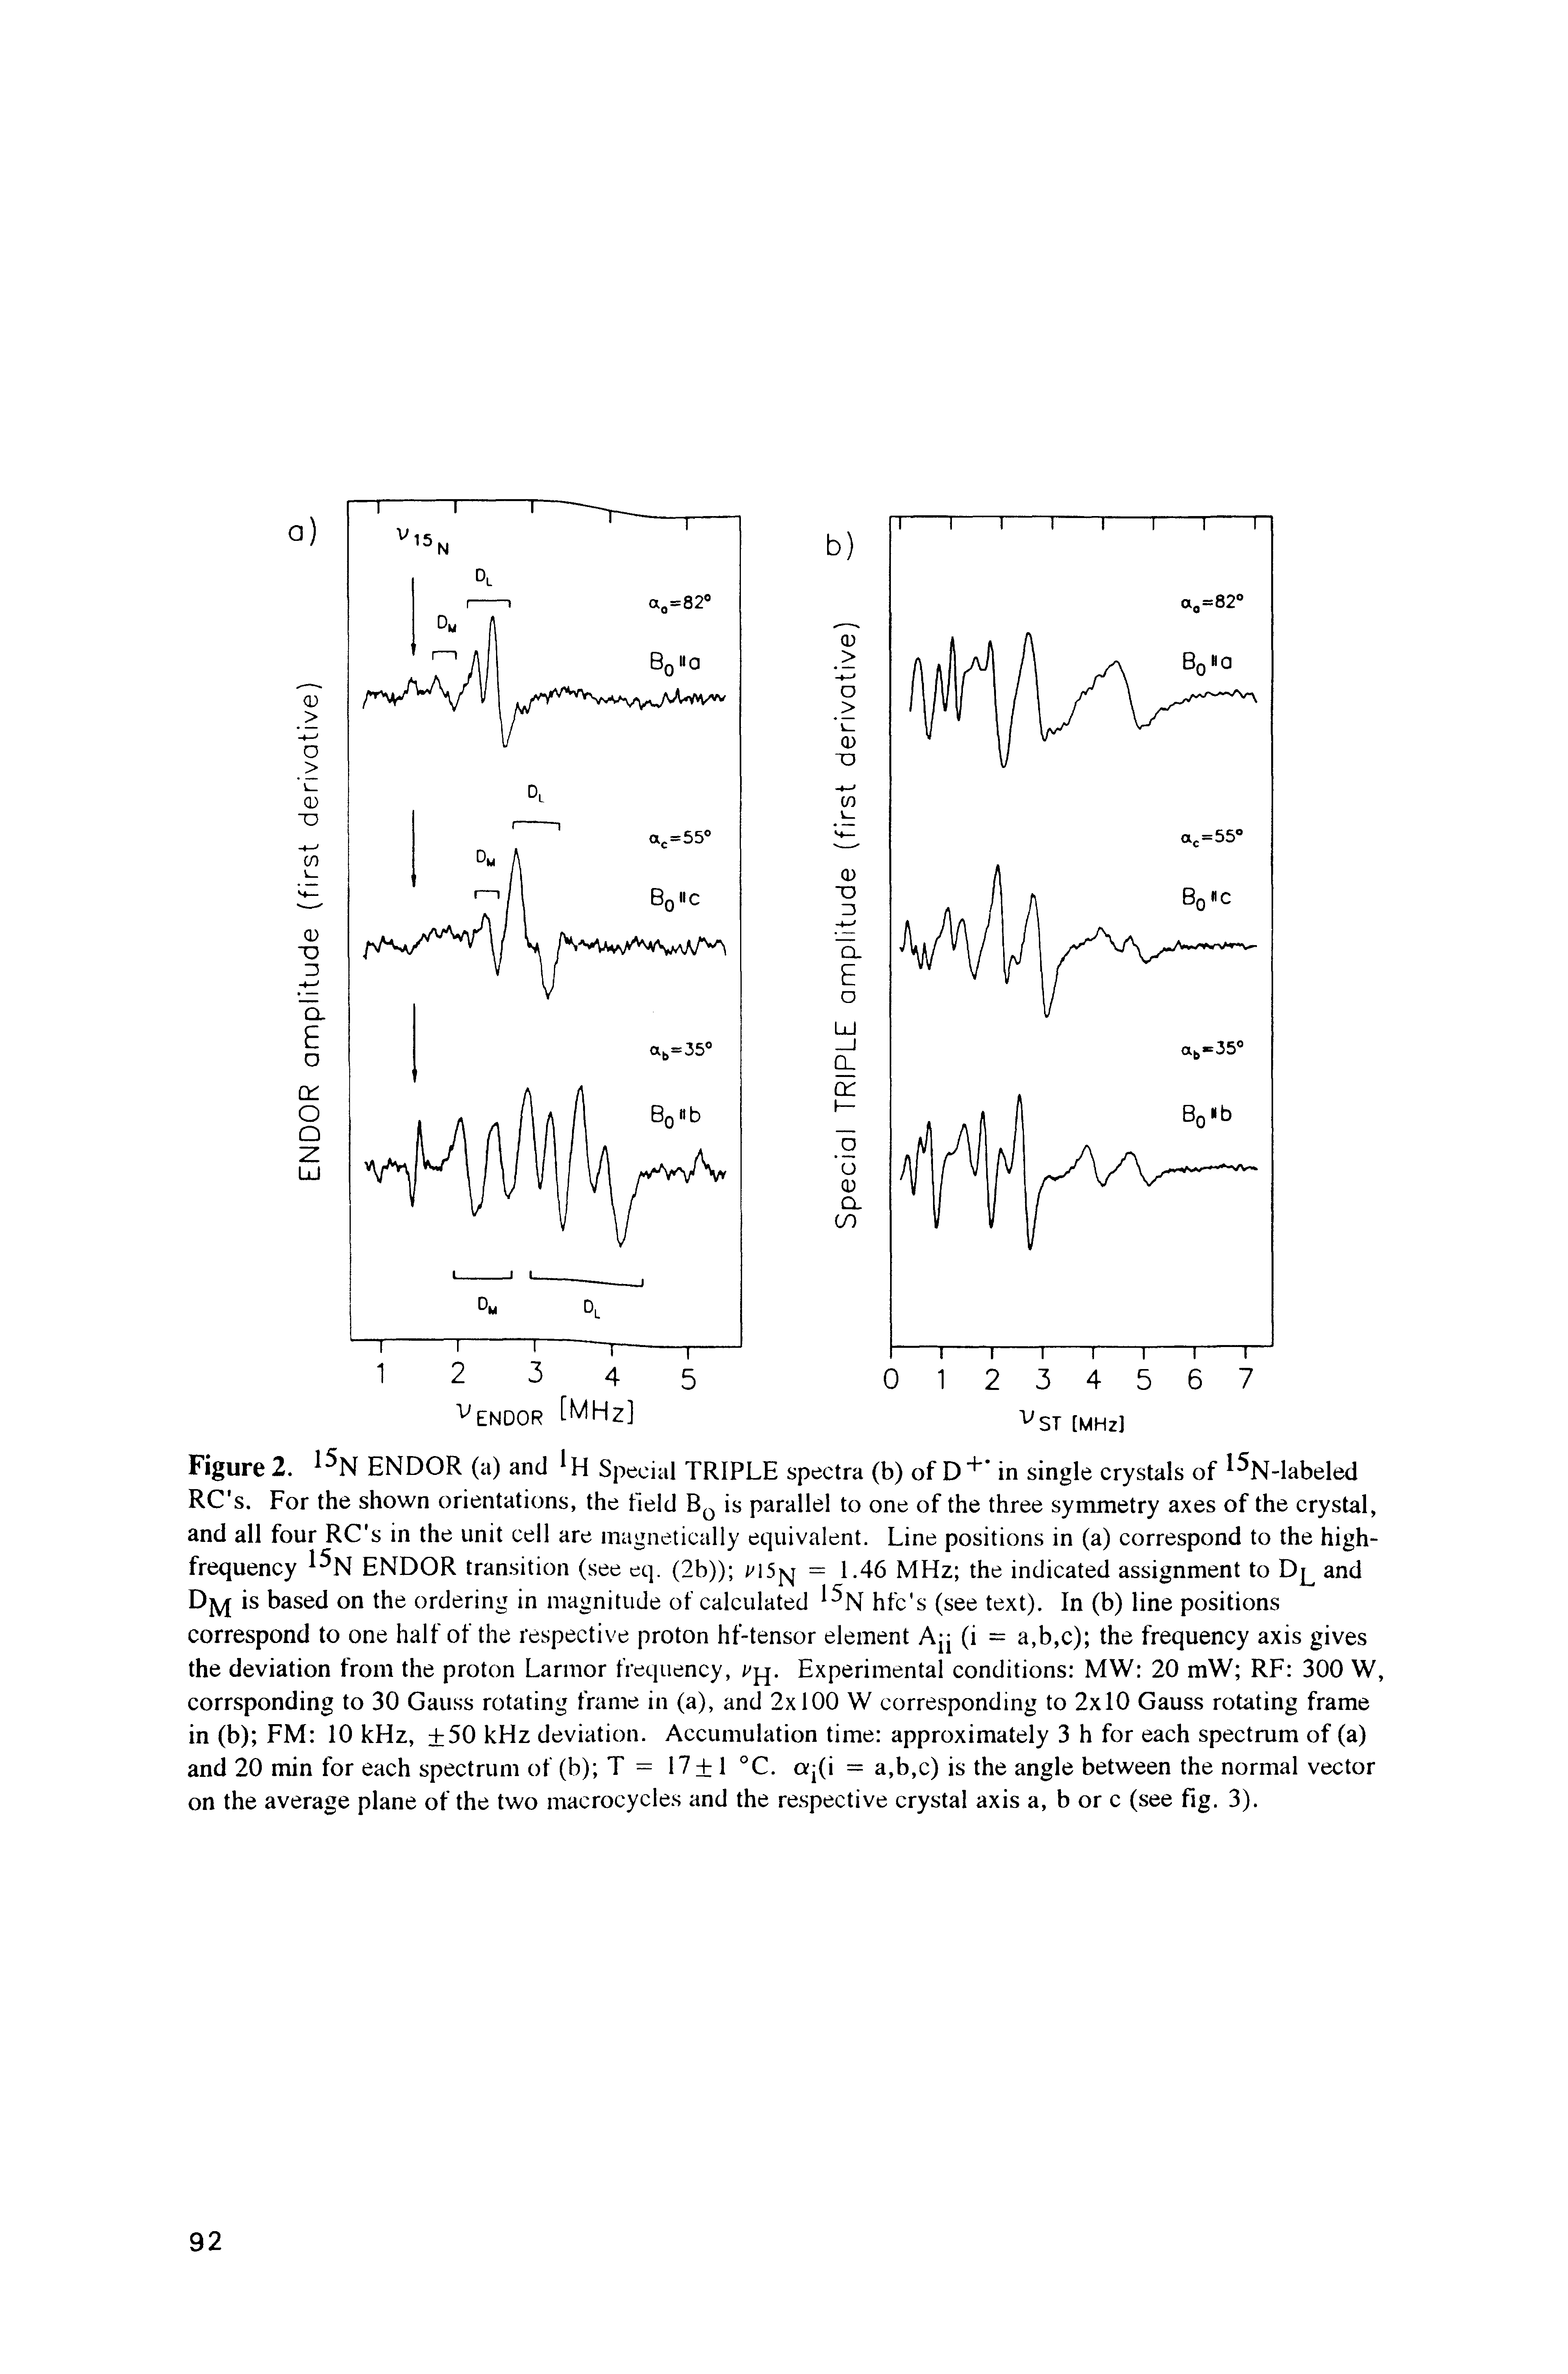 Figure 2. ENDOR (a) and Special TRIPLE spectra (b) of D in single crystals of %-labeled RC s. For the shown orientations, the field is parallel to one of the three symmetry axes of the crystal, and all four RC s in the unit cell are magnetically equivalent. Line positions in (a) correspond to the high-frequency ENDOR transition (see eq. (2b)) = 1.46 MHz the indicated assignment to and...